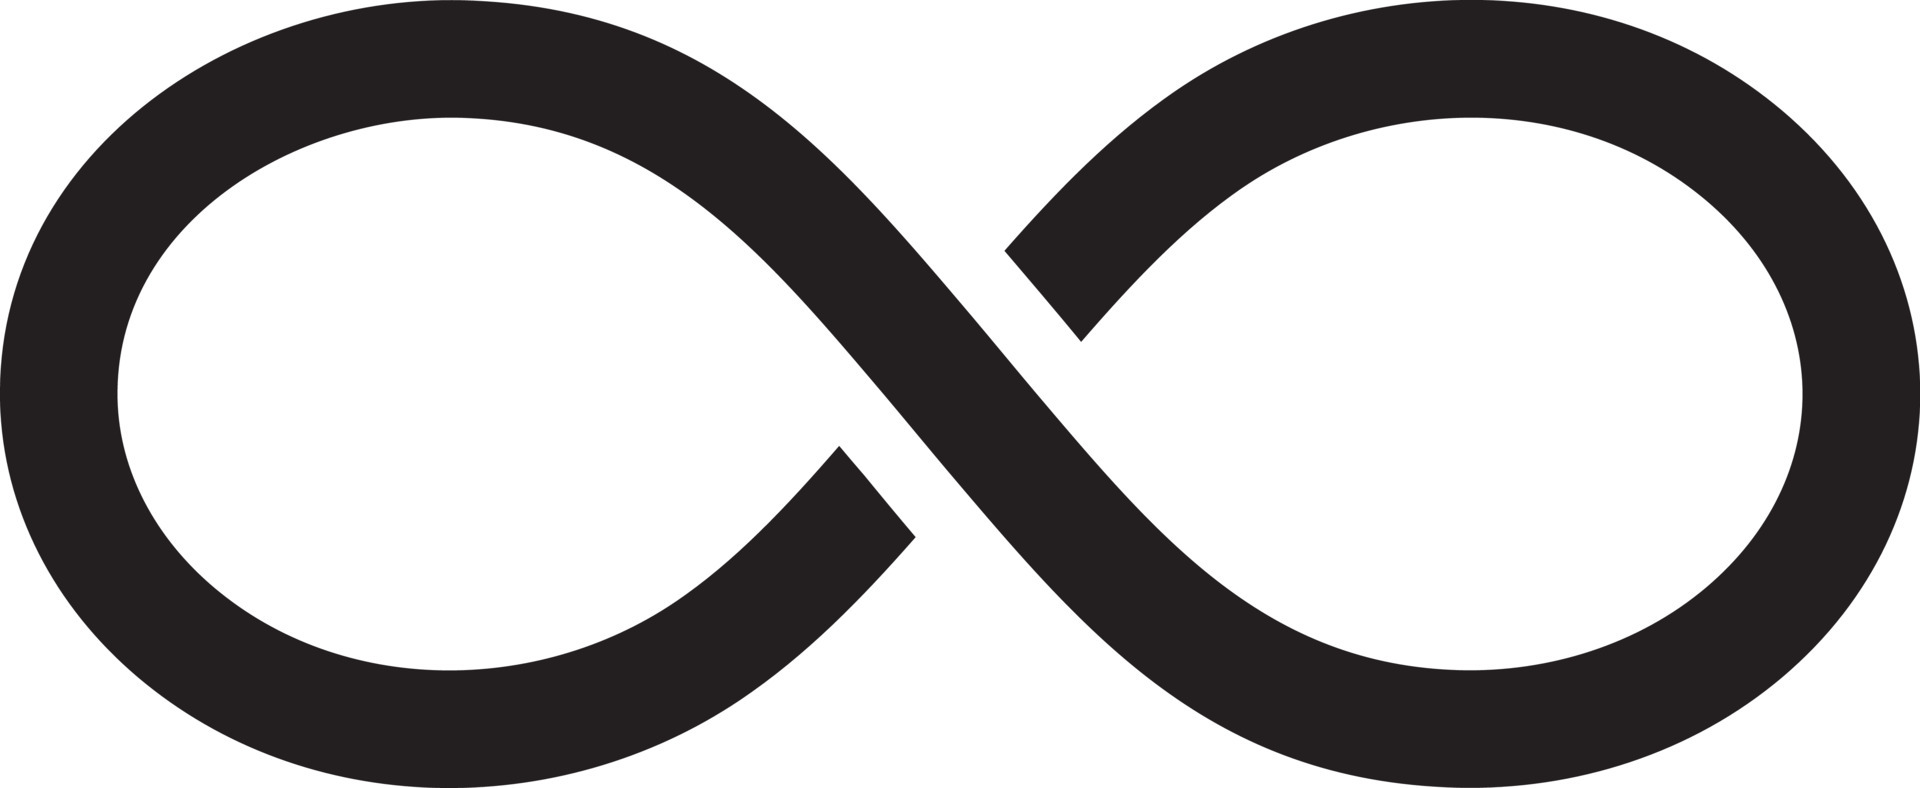 17500 Infinity Symbol Stock Videos and RoyaltyFree Footage  iStock   iStock  Infinity Infinity symbol vector Infinity sign